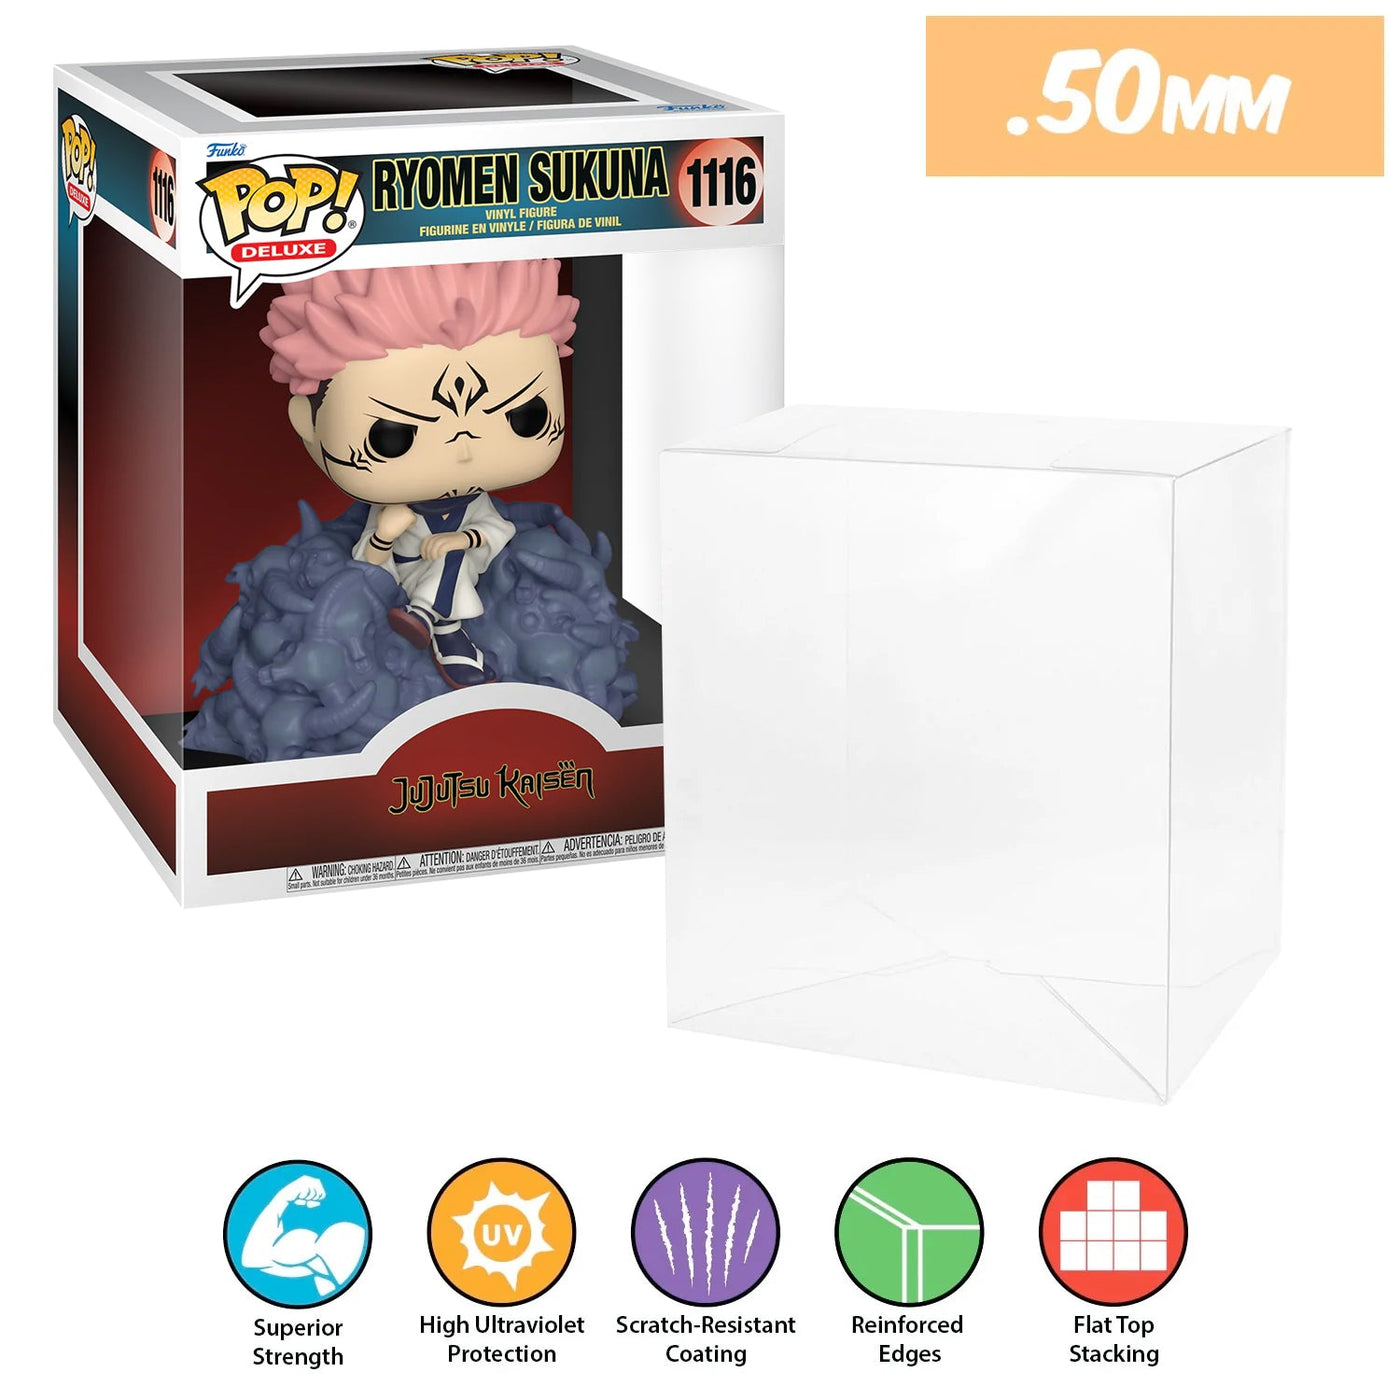 pop deluxe ryomen sukuna 1116 best funko pop protectors thick strong uv scratch flat top stack vinyl display geek plastic shield vaulted eco armor fits collect protect display case kollector protector